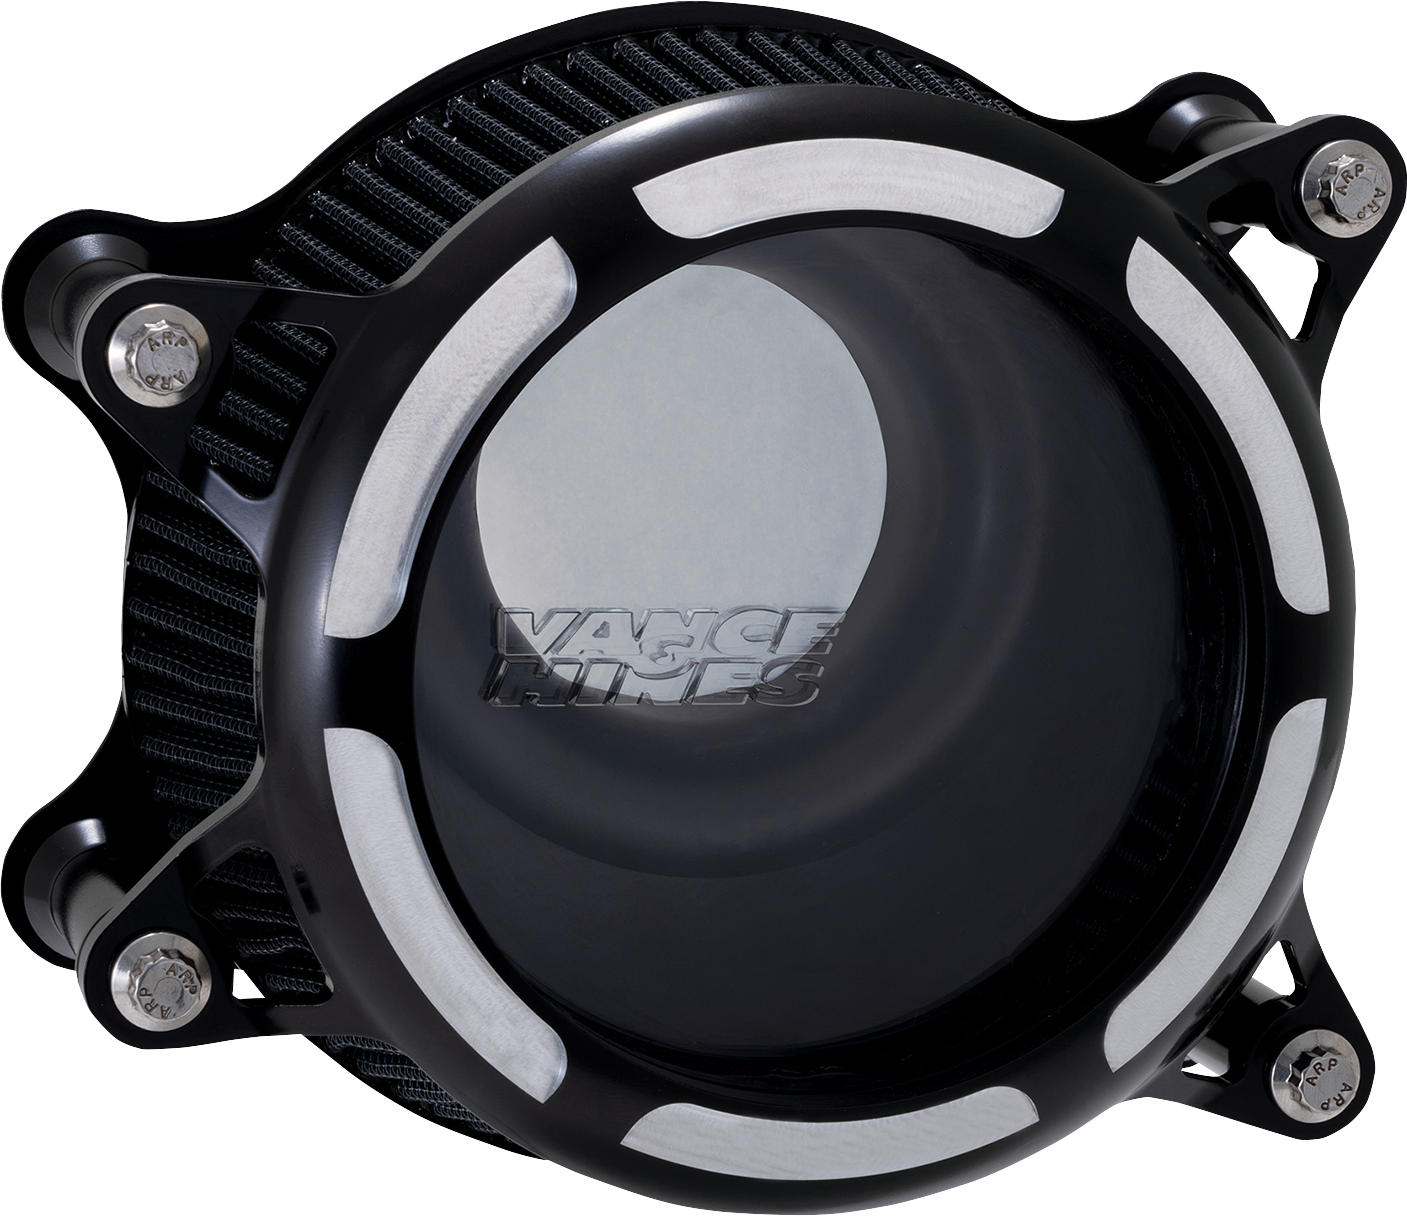 VANCE & HINES VO2 Insight Air Cleaner - Black Contrast 41093